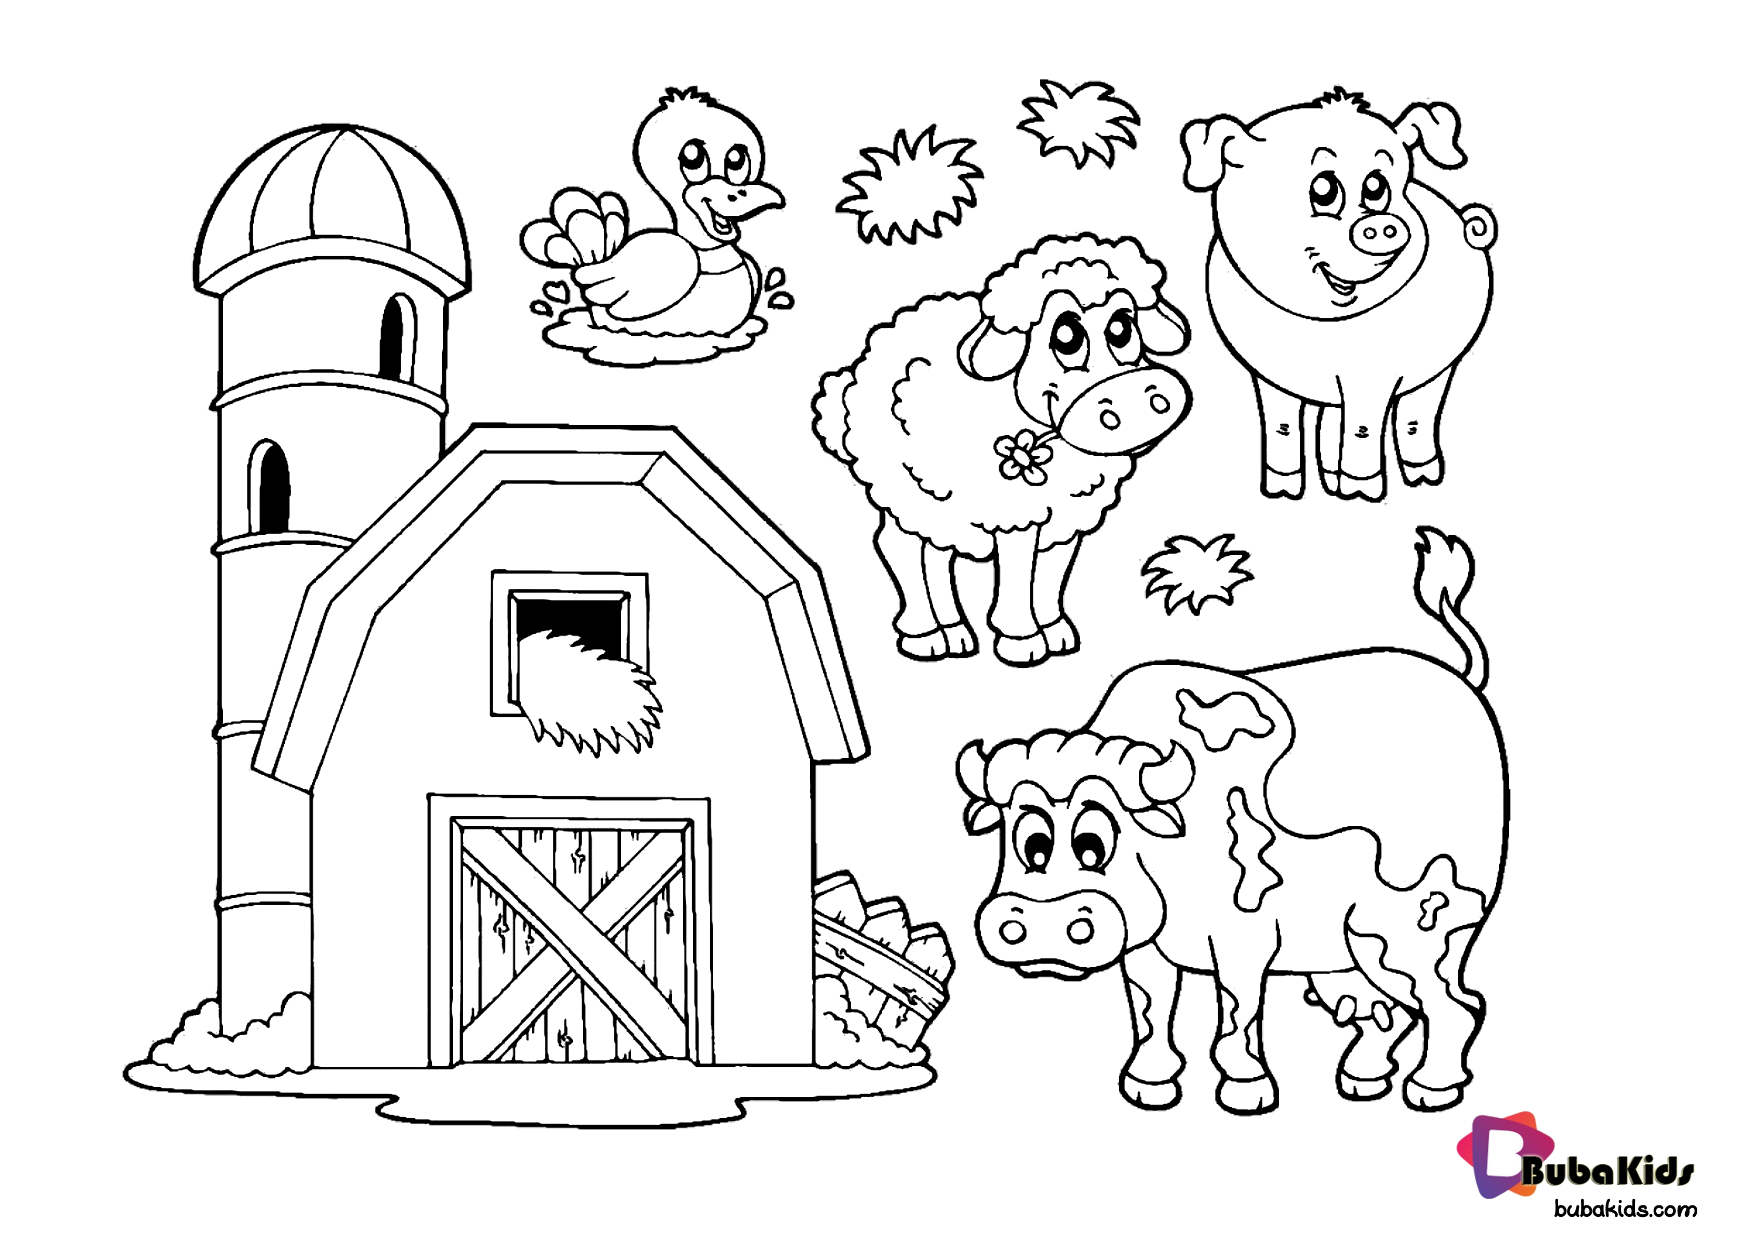 Farm animal coloring page for children to print and color